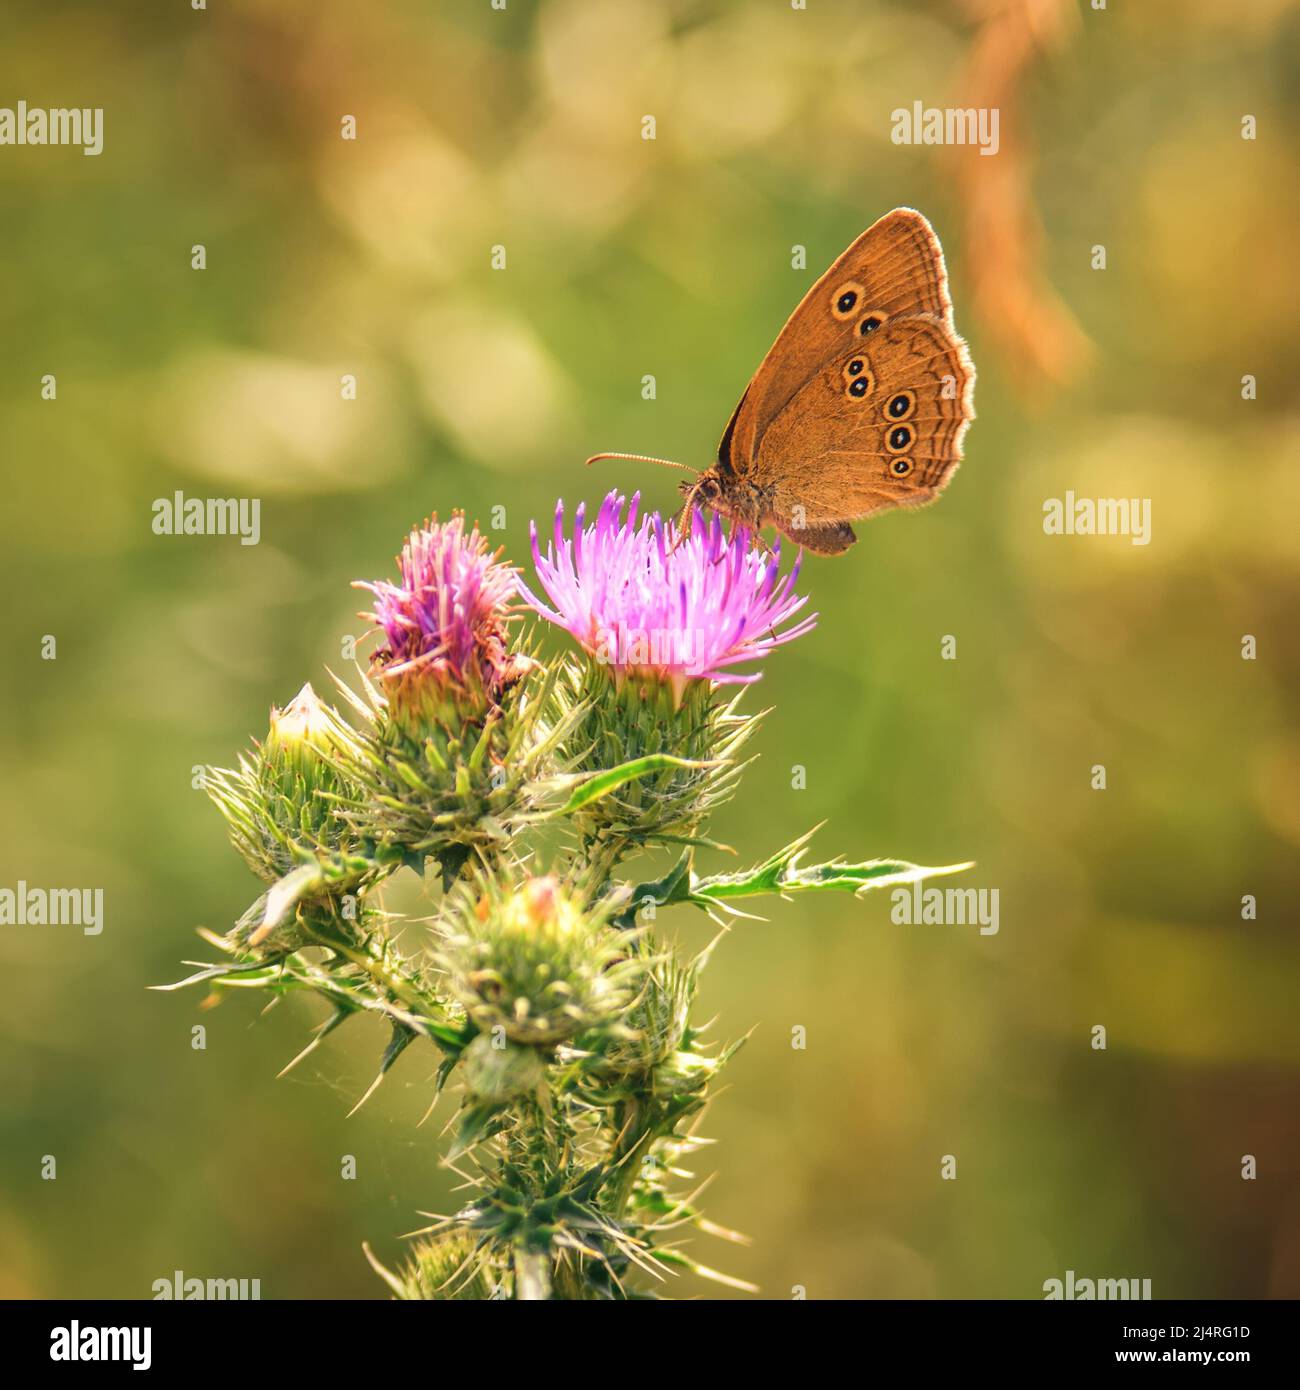 Beautiful summer flower scenery. Close up of a butterfly on a pink flower. Photo in shallow depth of field. Stock Photo